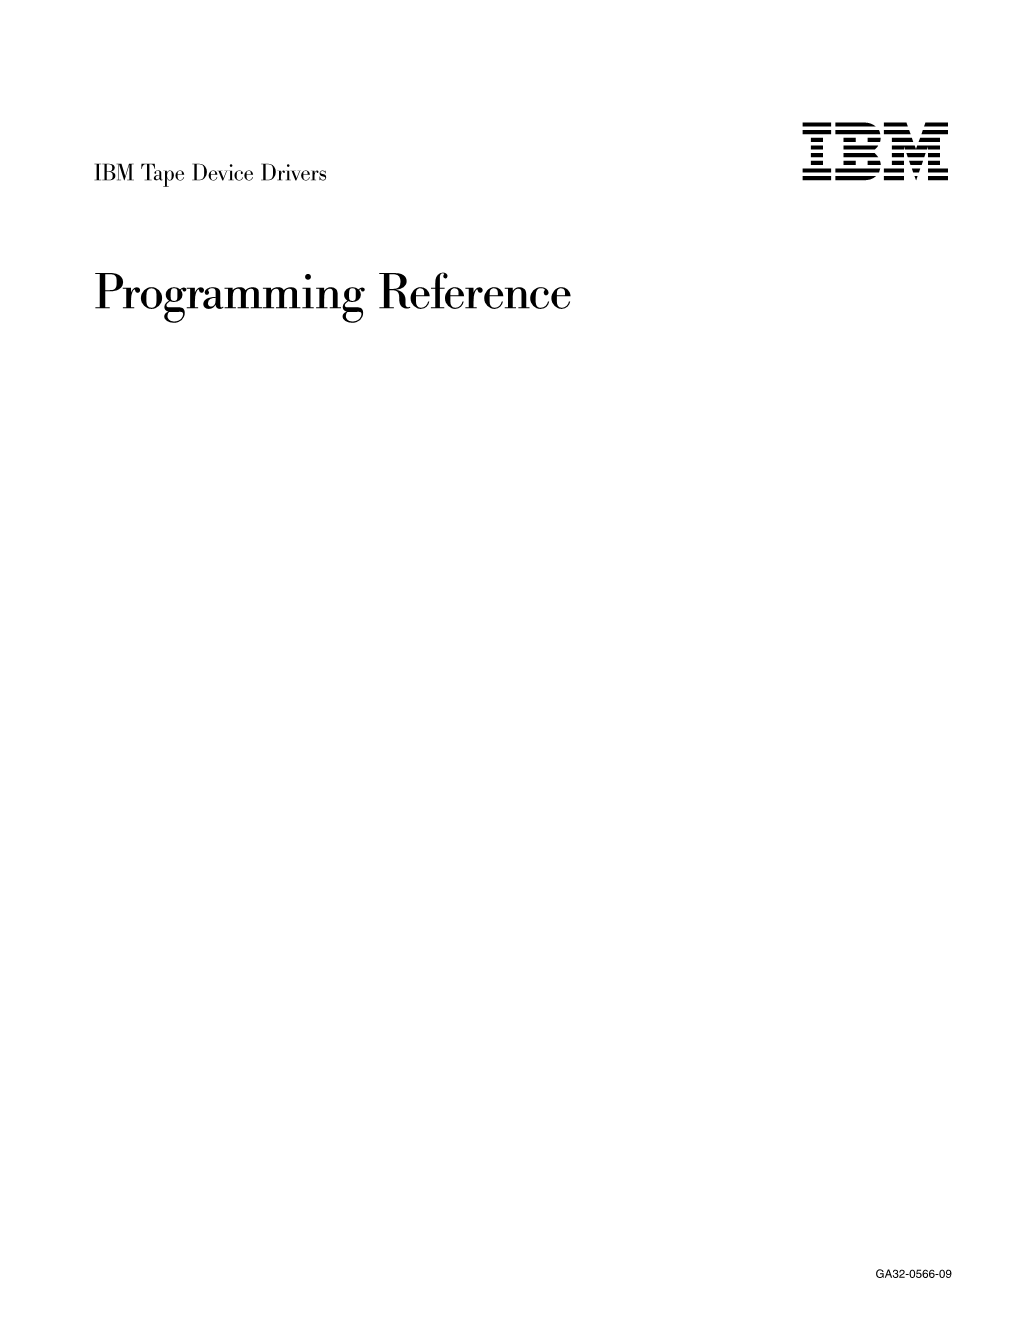 IBM Tape Device Drivers: Programming Reference Contents